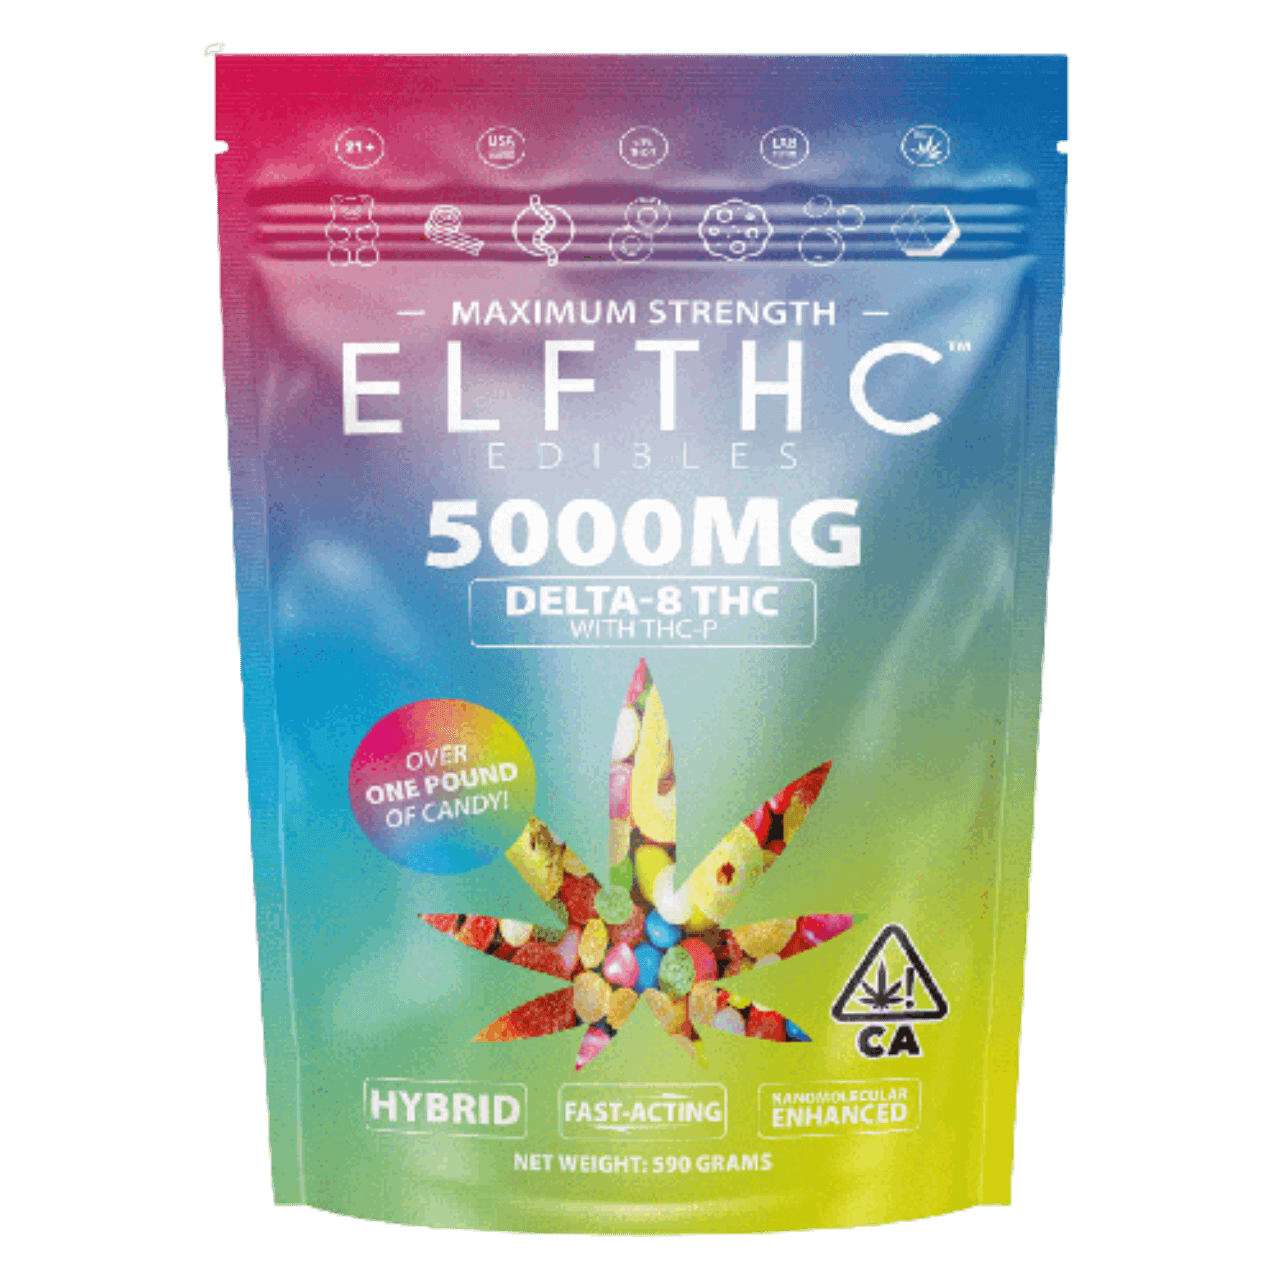 ELFTHC Delta-8 THC-P 5000mg Edibles Party Pack